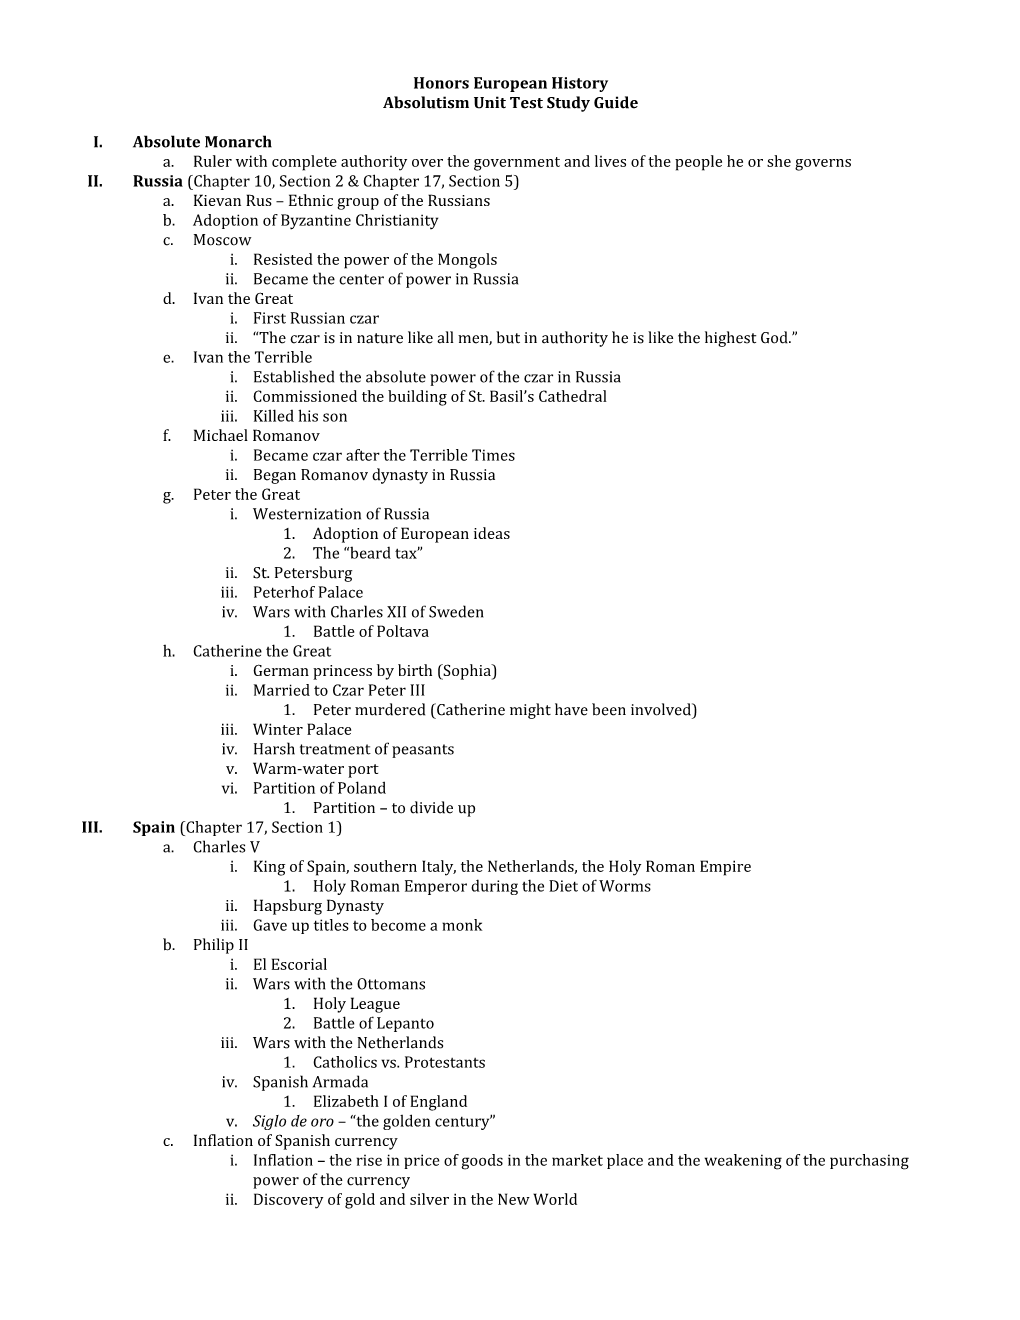 Absolutism Unit Test Study Guide